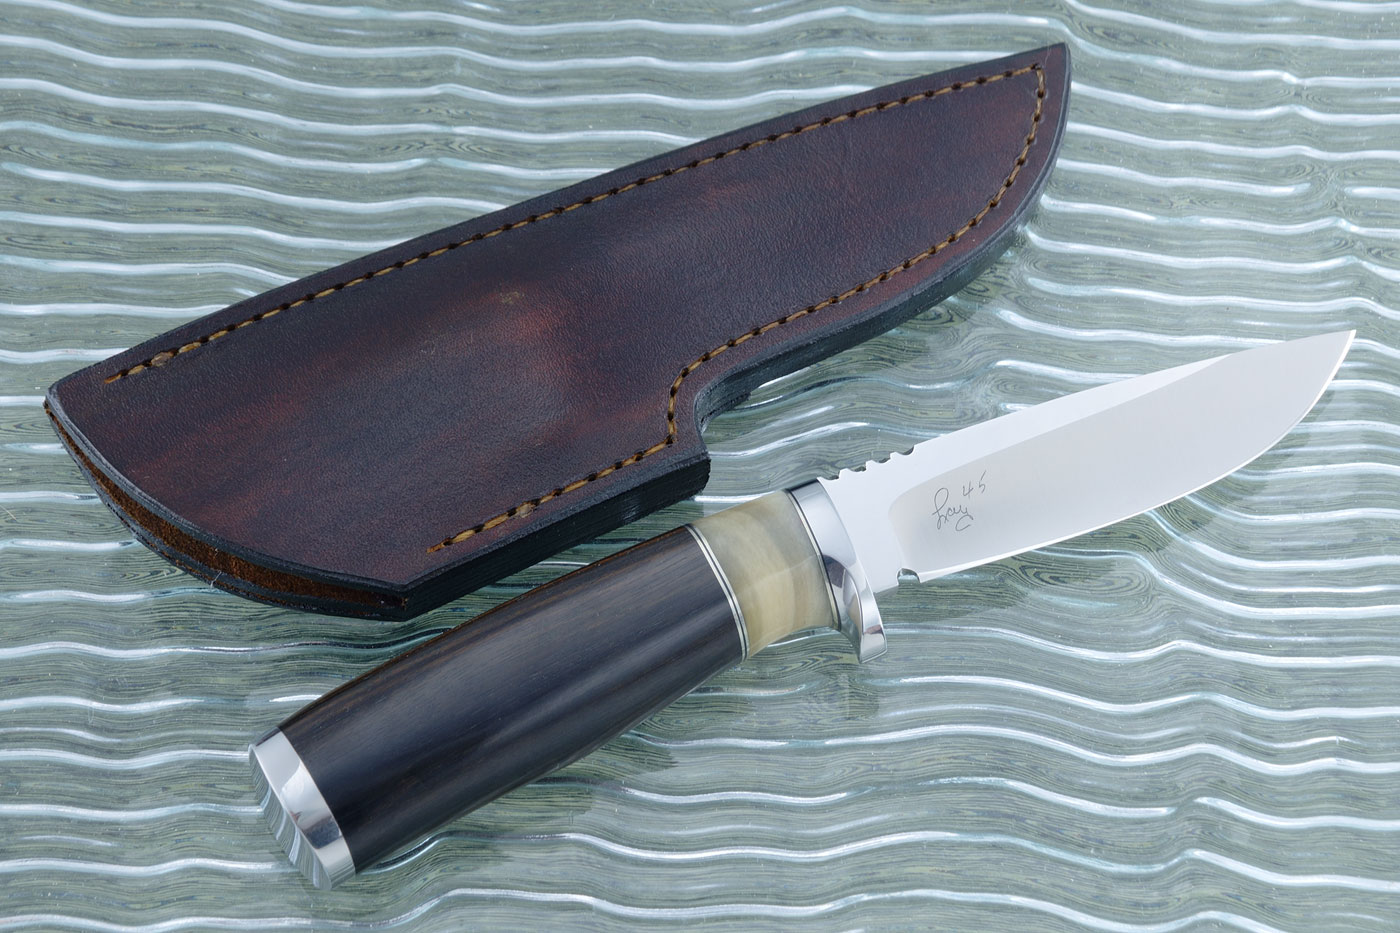 Personal with Mun Ebony and Sheep Horn (45th Anniversary Knife)